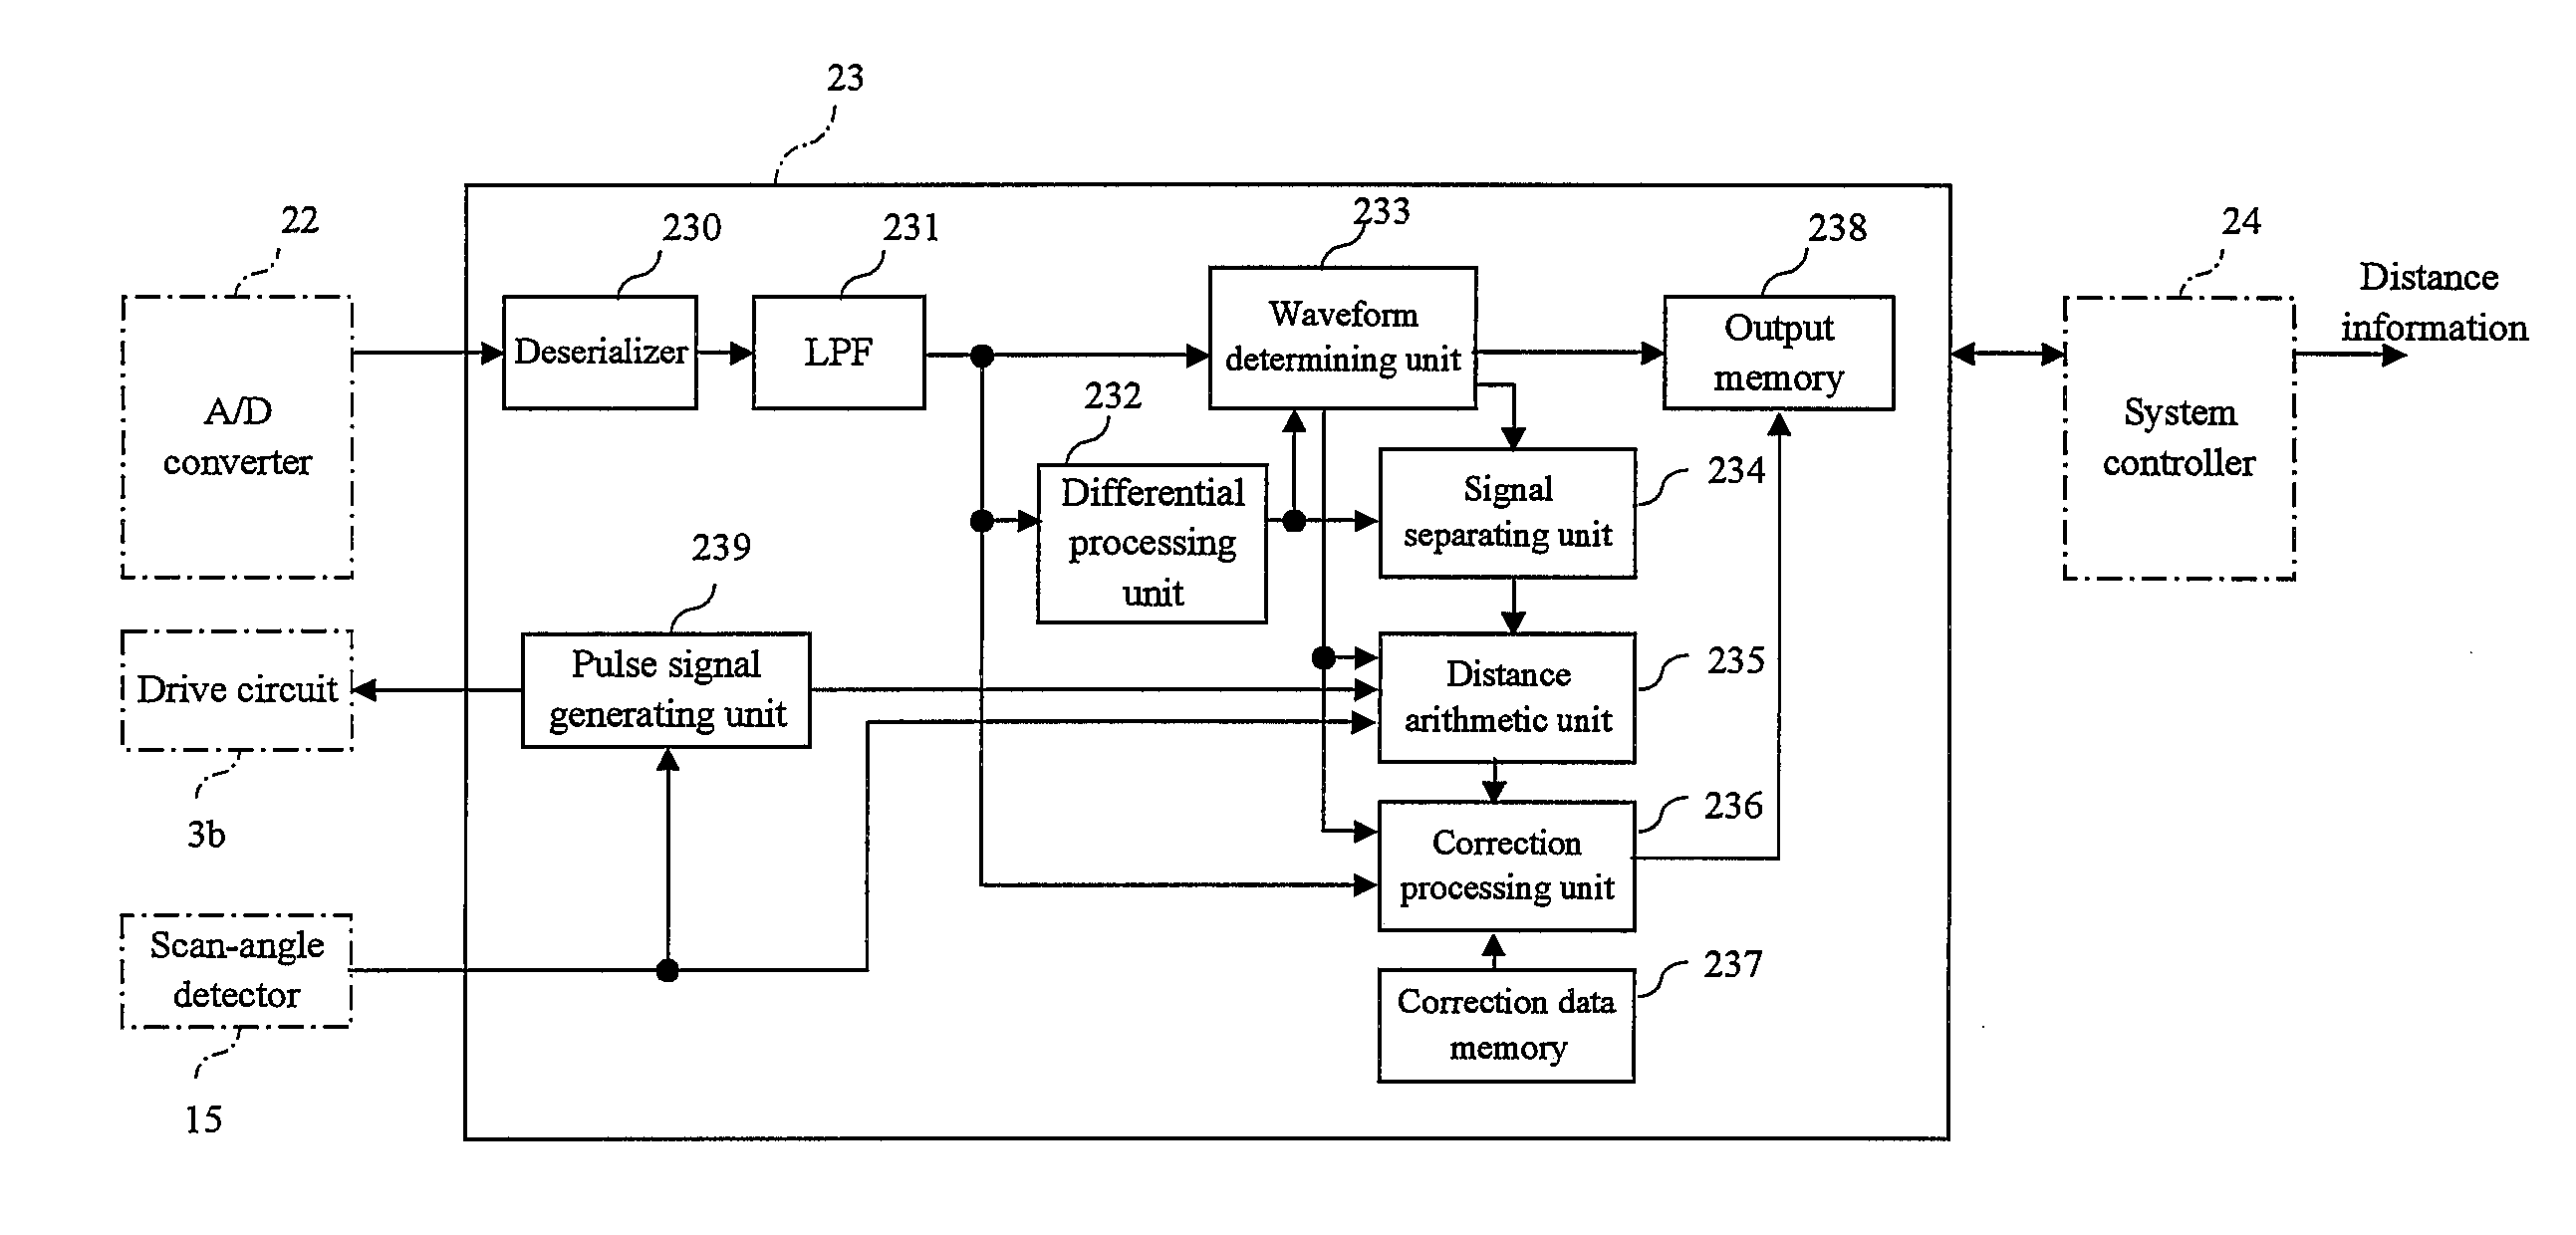 Signal processing apparatus used for operations for range finding and scanning rangefinder